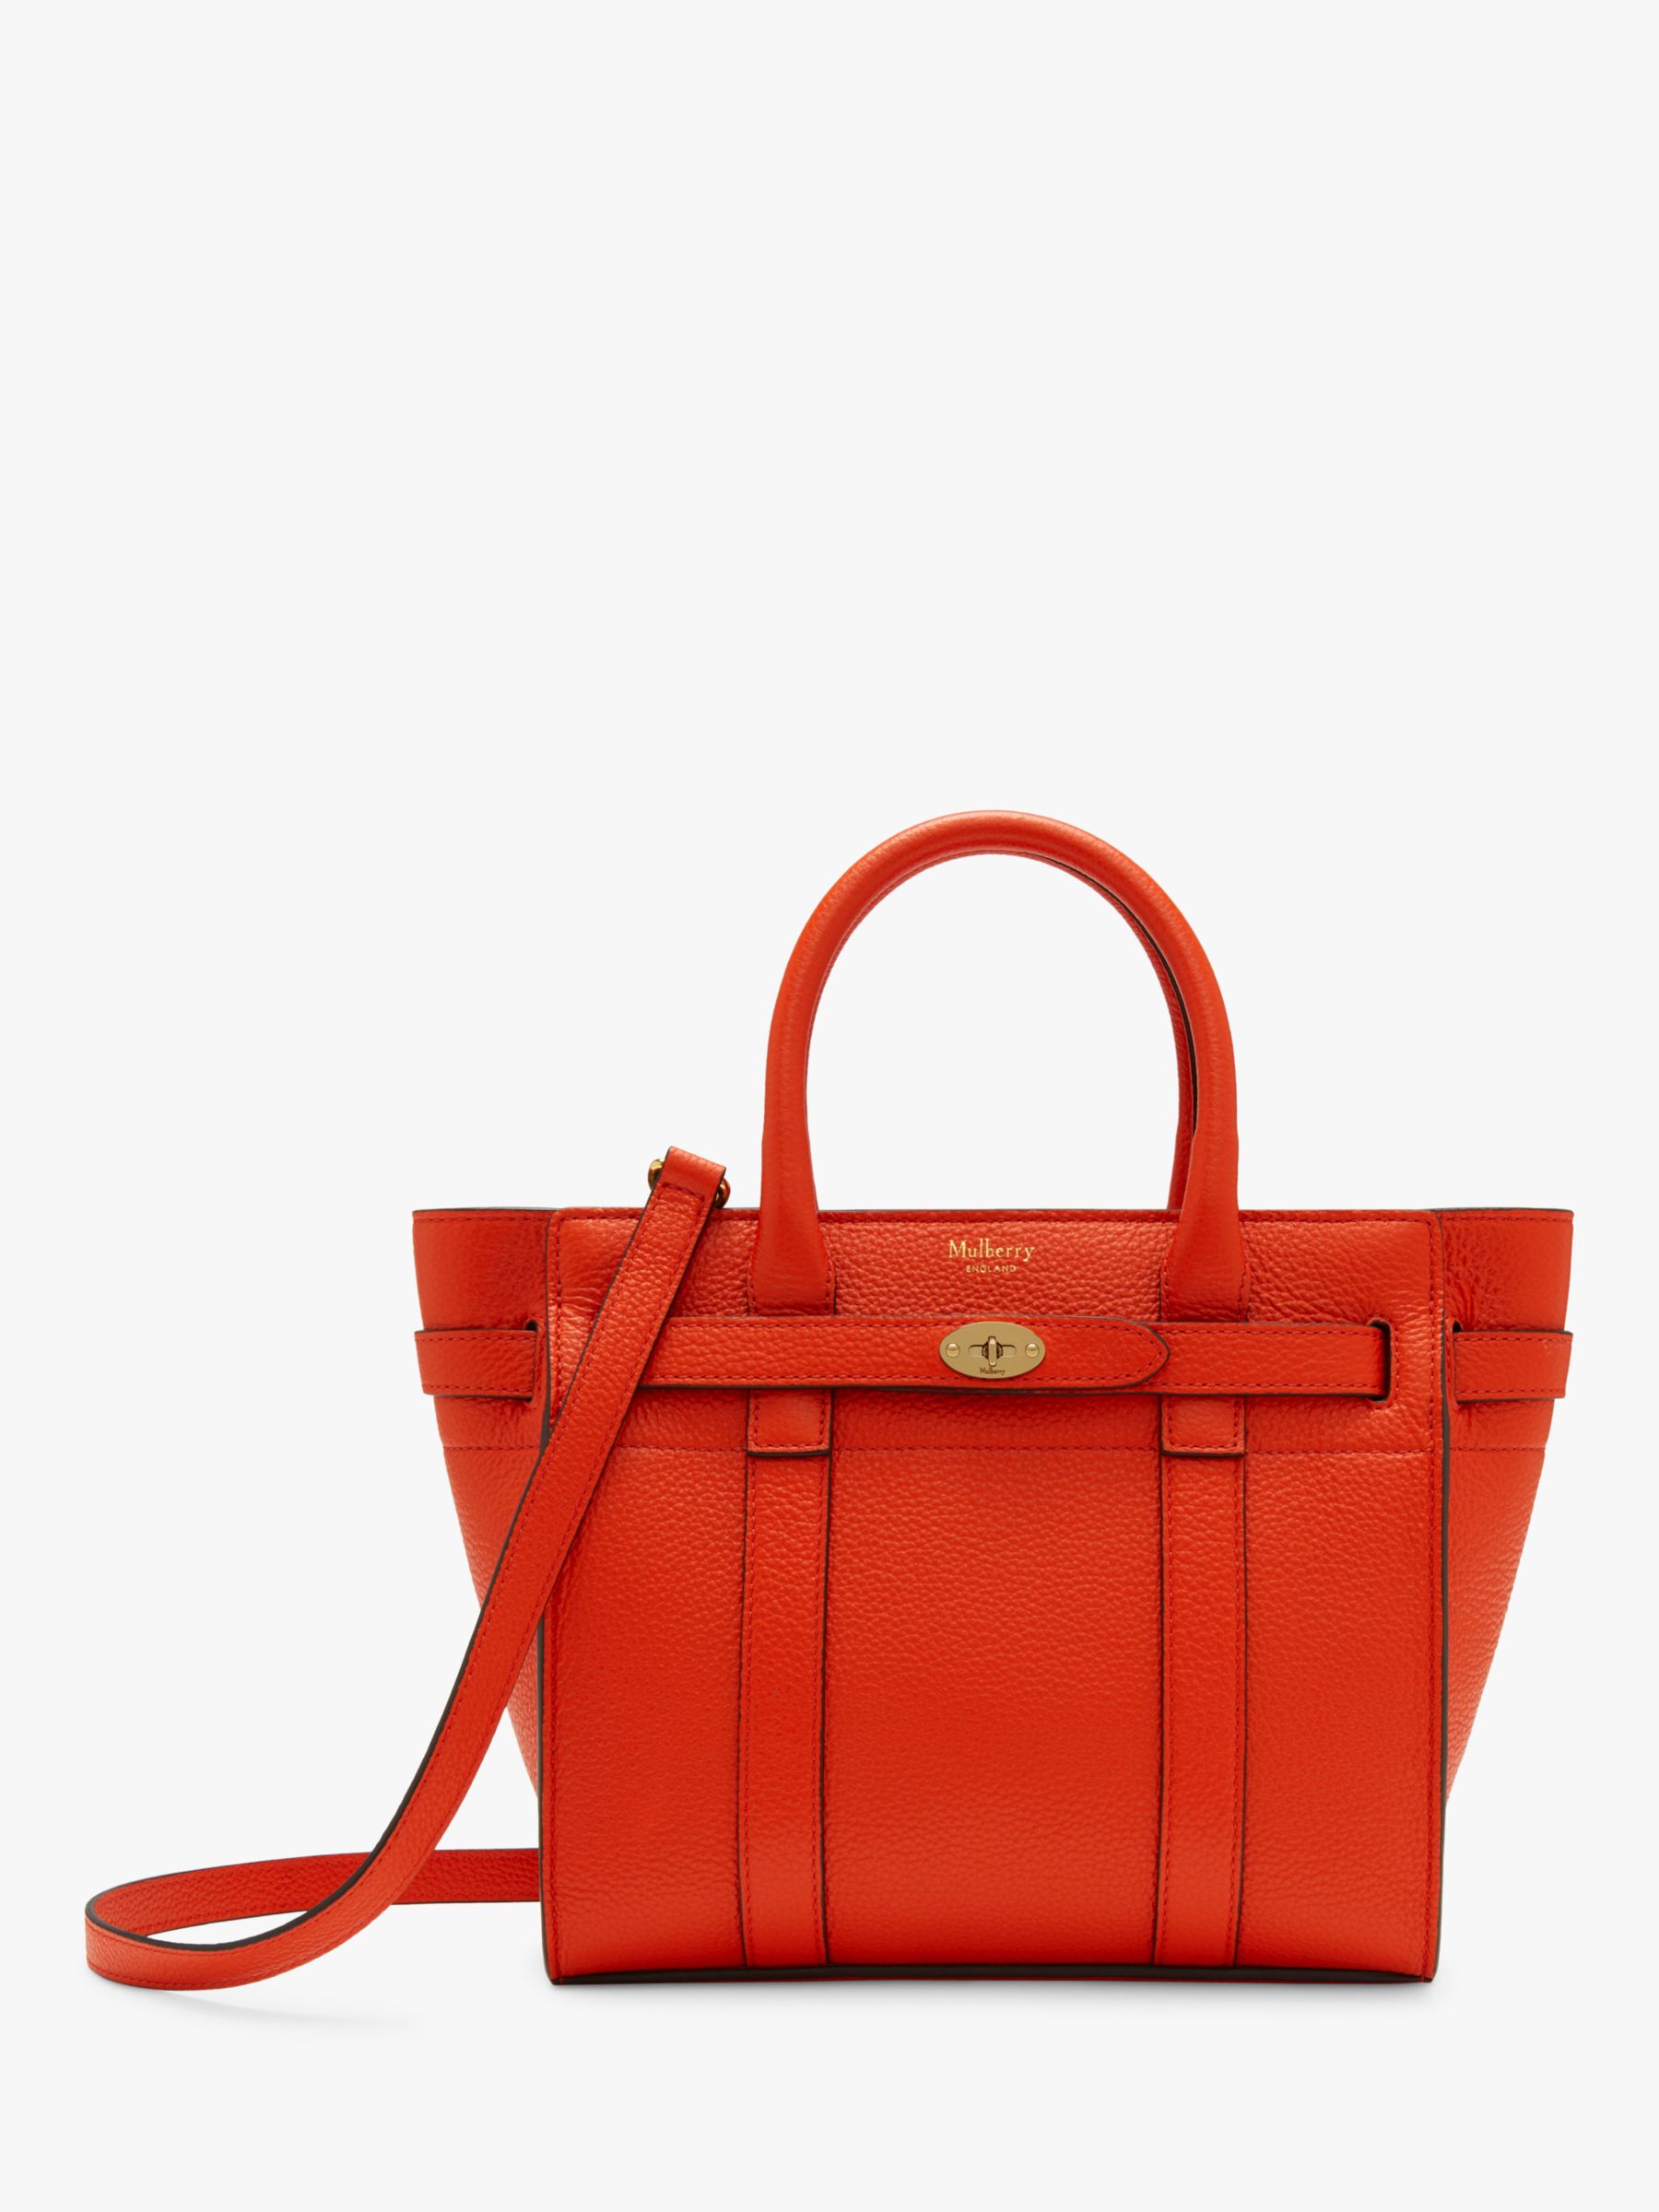 Mulberry Mini Bayswater Zipped Classic Grain Leather Tote Bag, Coral at John Lewis & Partners